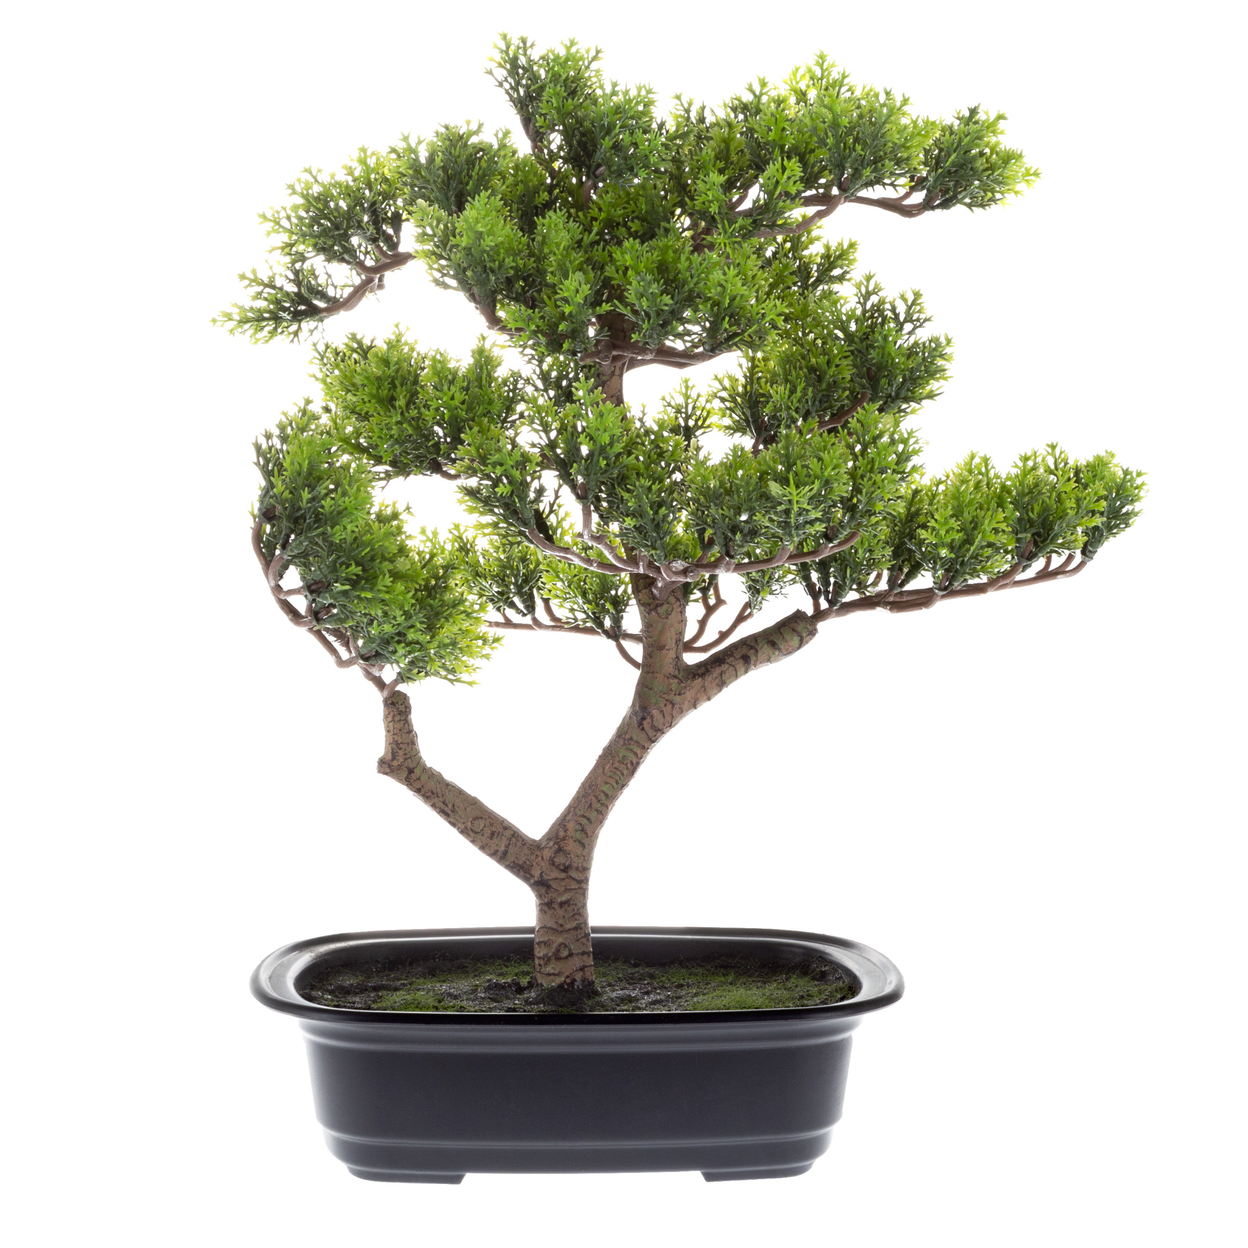 Faux Pine Bonsai Tree 14.5 Inch Artificial Topiary For Desk, Tables